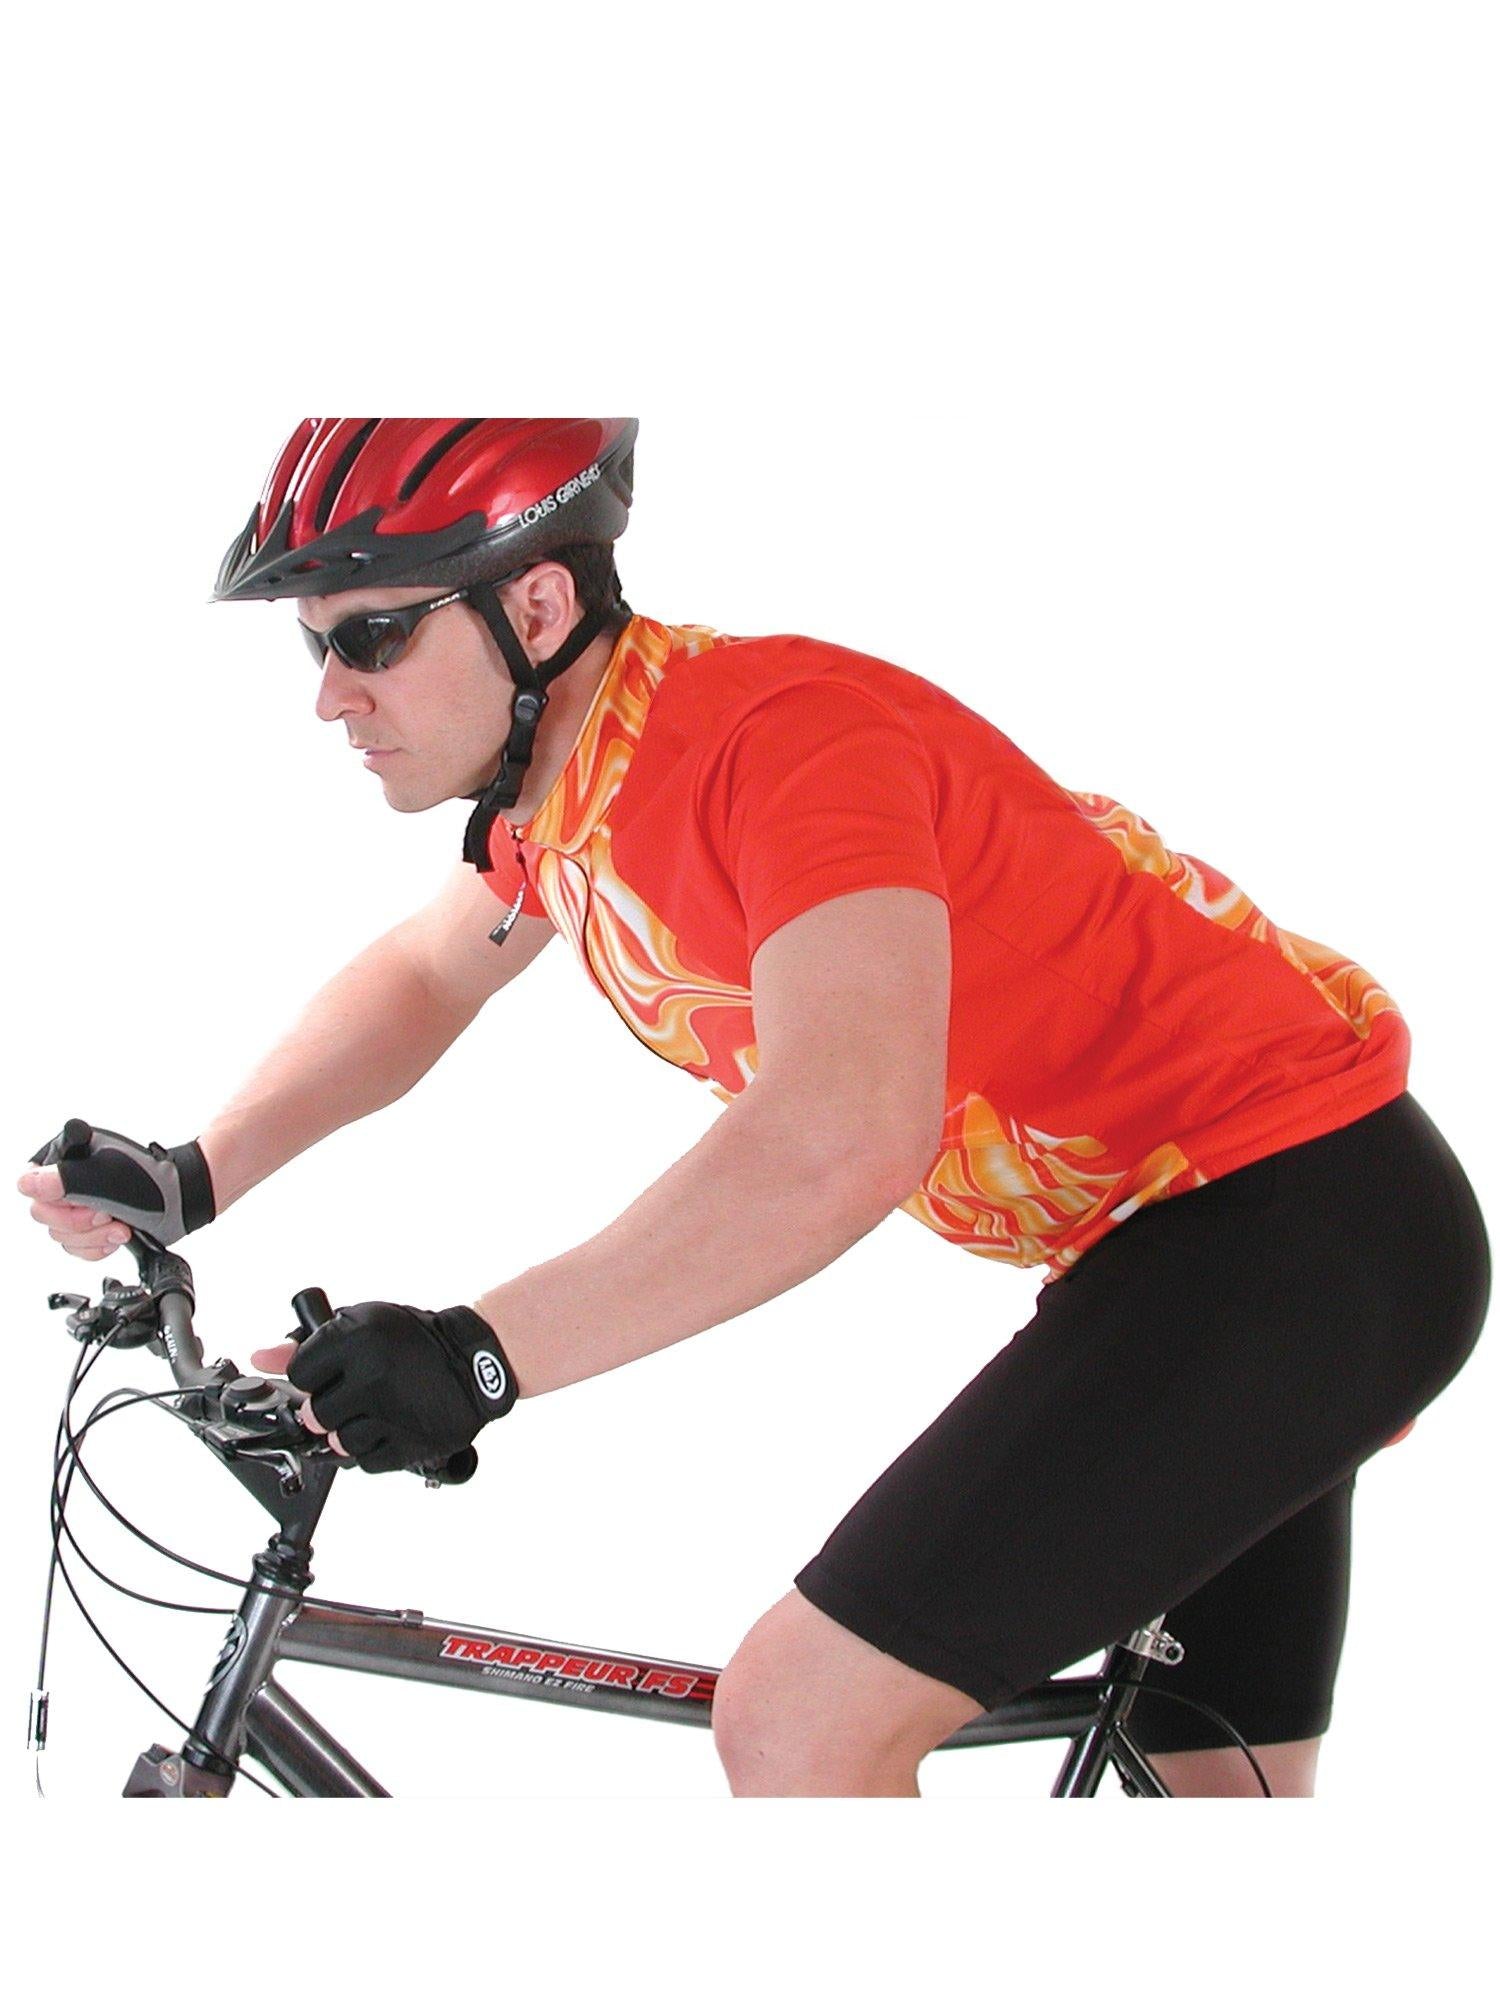 Jalie 2216 - Sewing Pattern for Cycling Jersey, Shorts and Tights